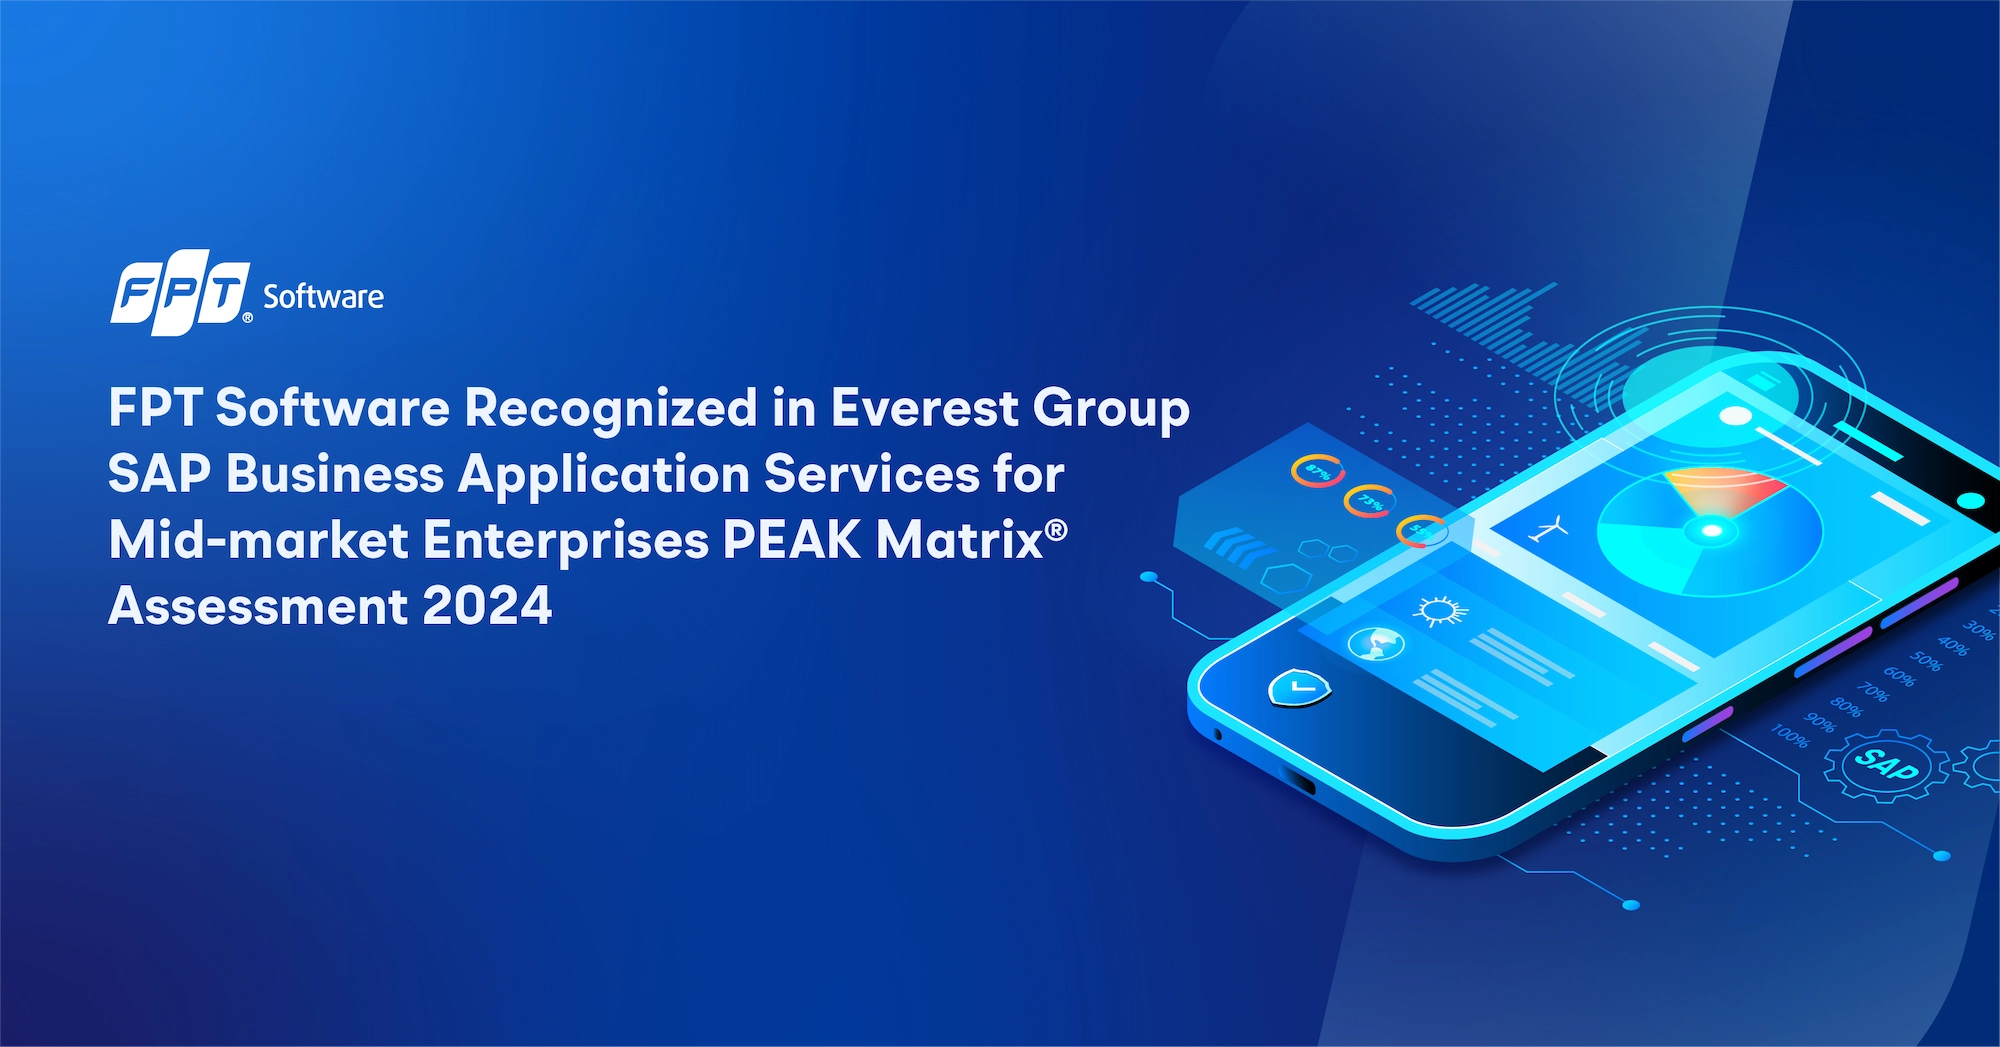 FPT Software Recognized in the Everest Group SAP Business Application Services 